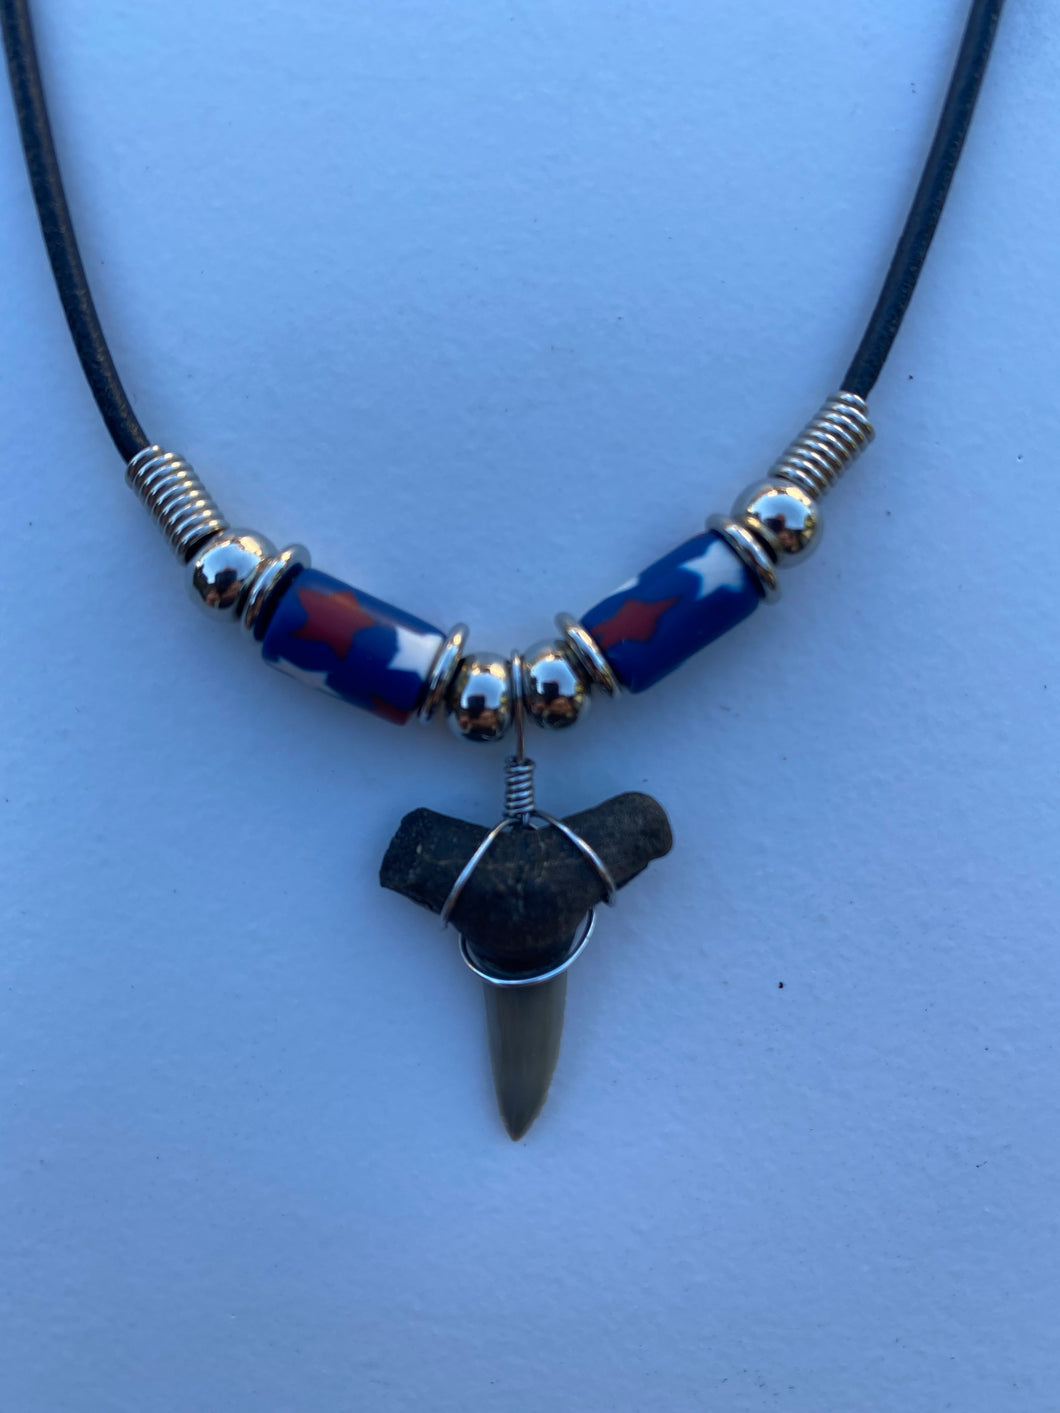 Shark Tooth Necklace Star Femo Beads